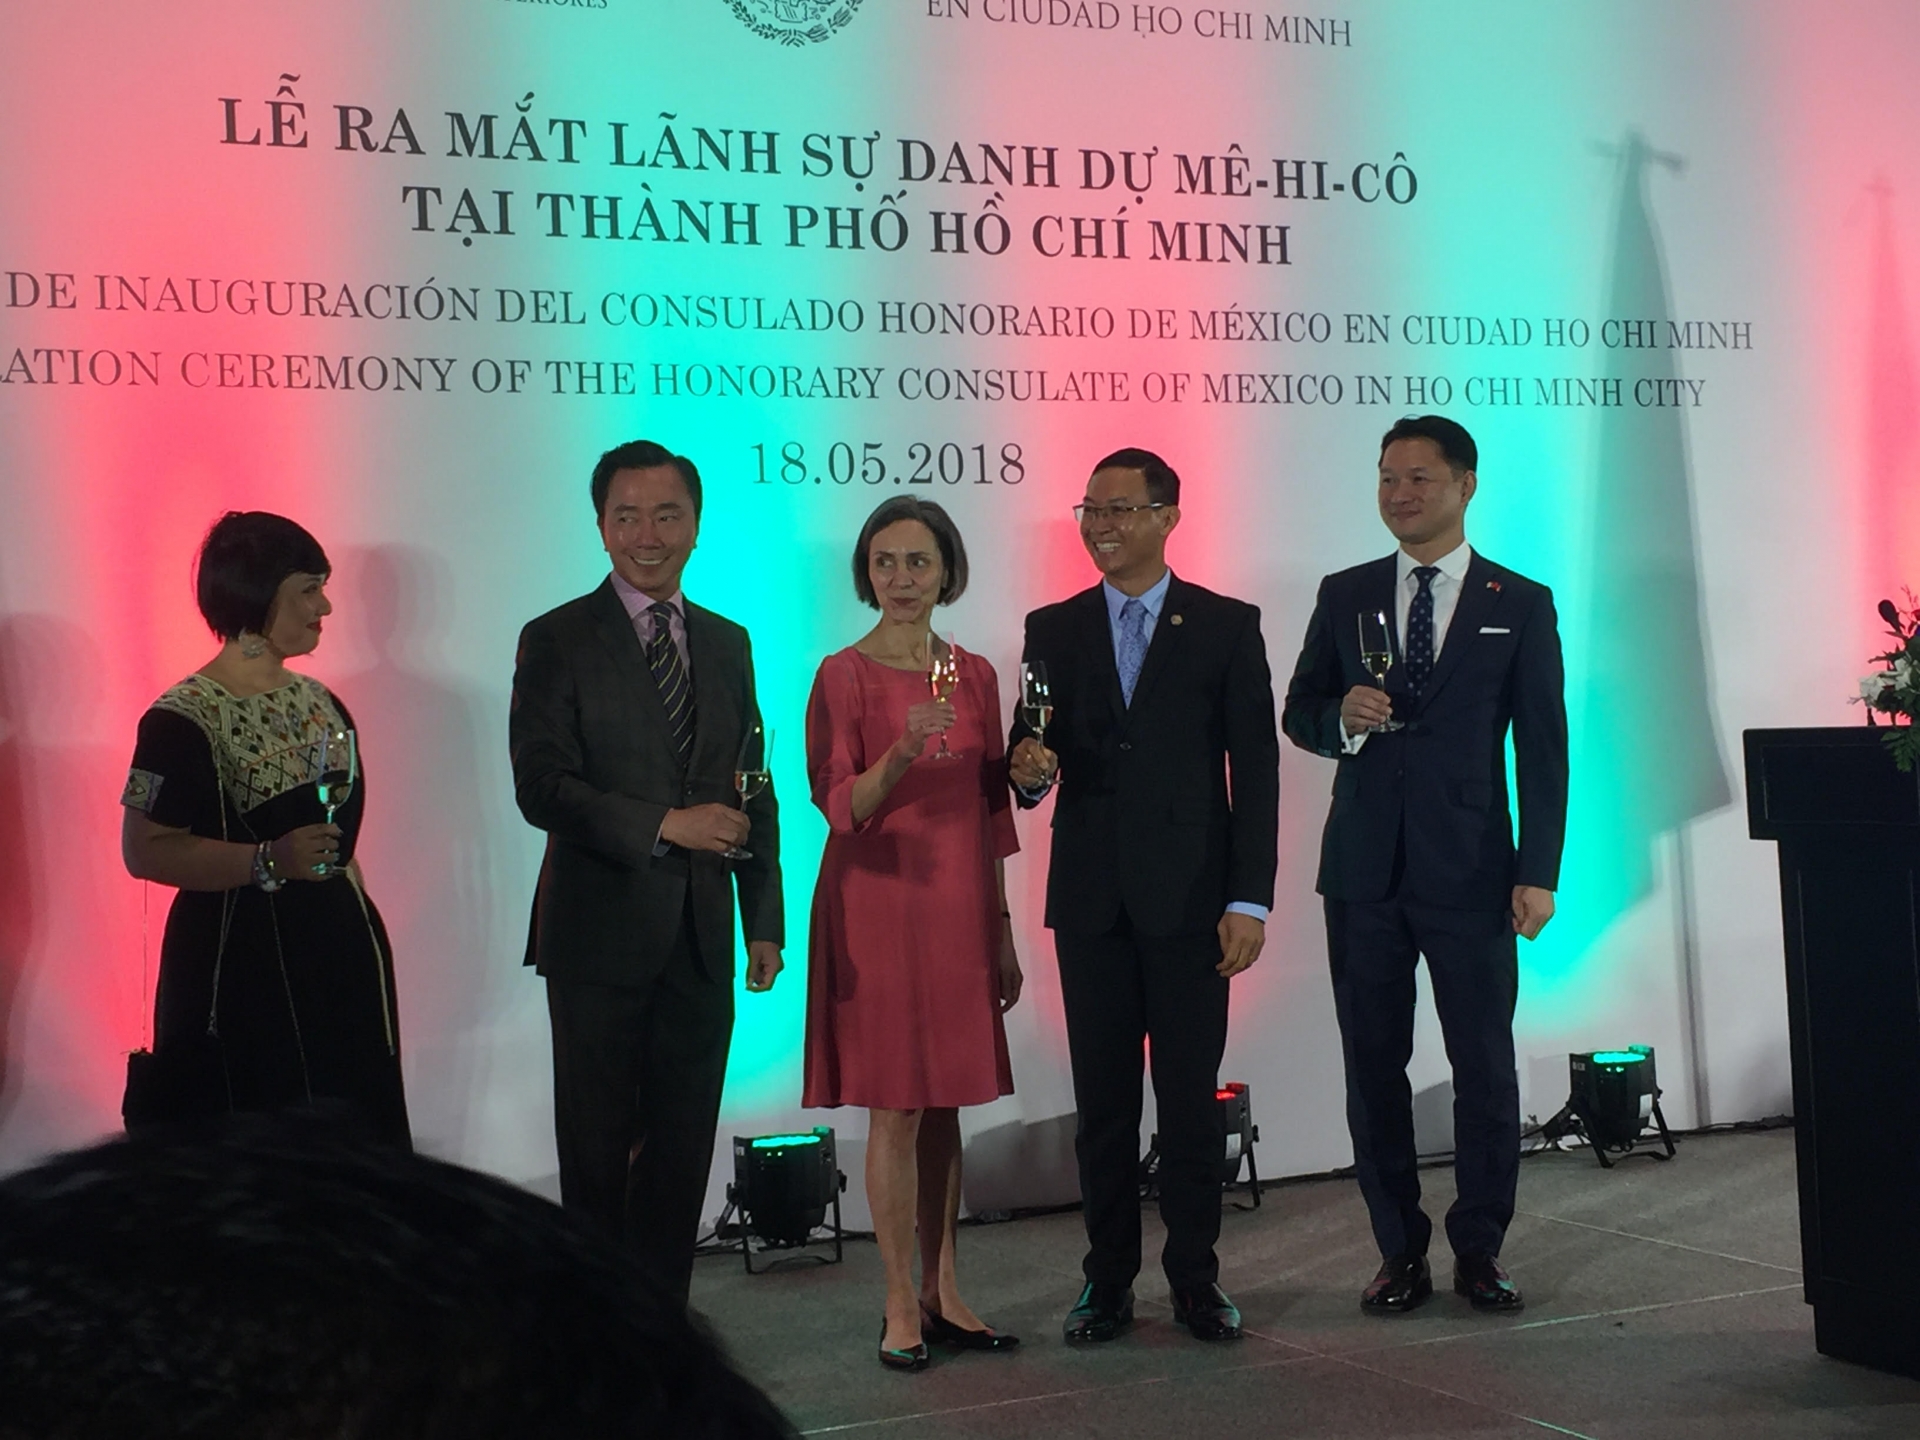 honorary consulate of mexico officially launched in ho chi minh city